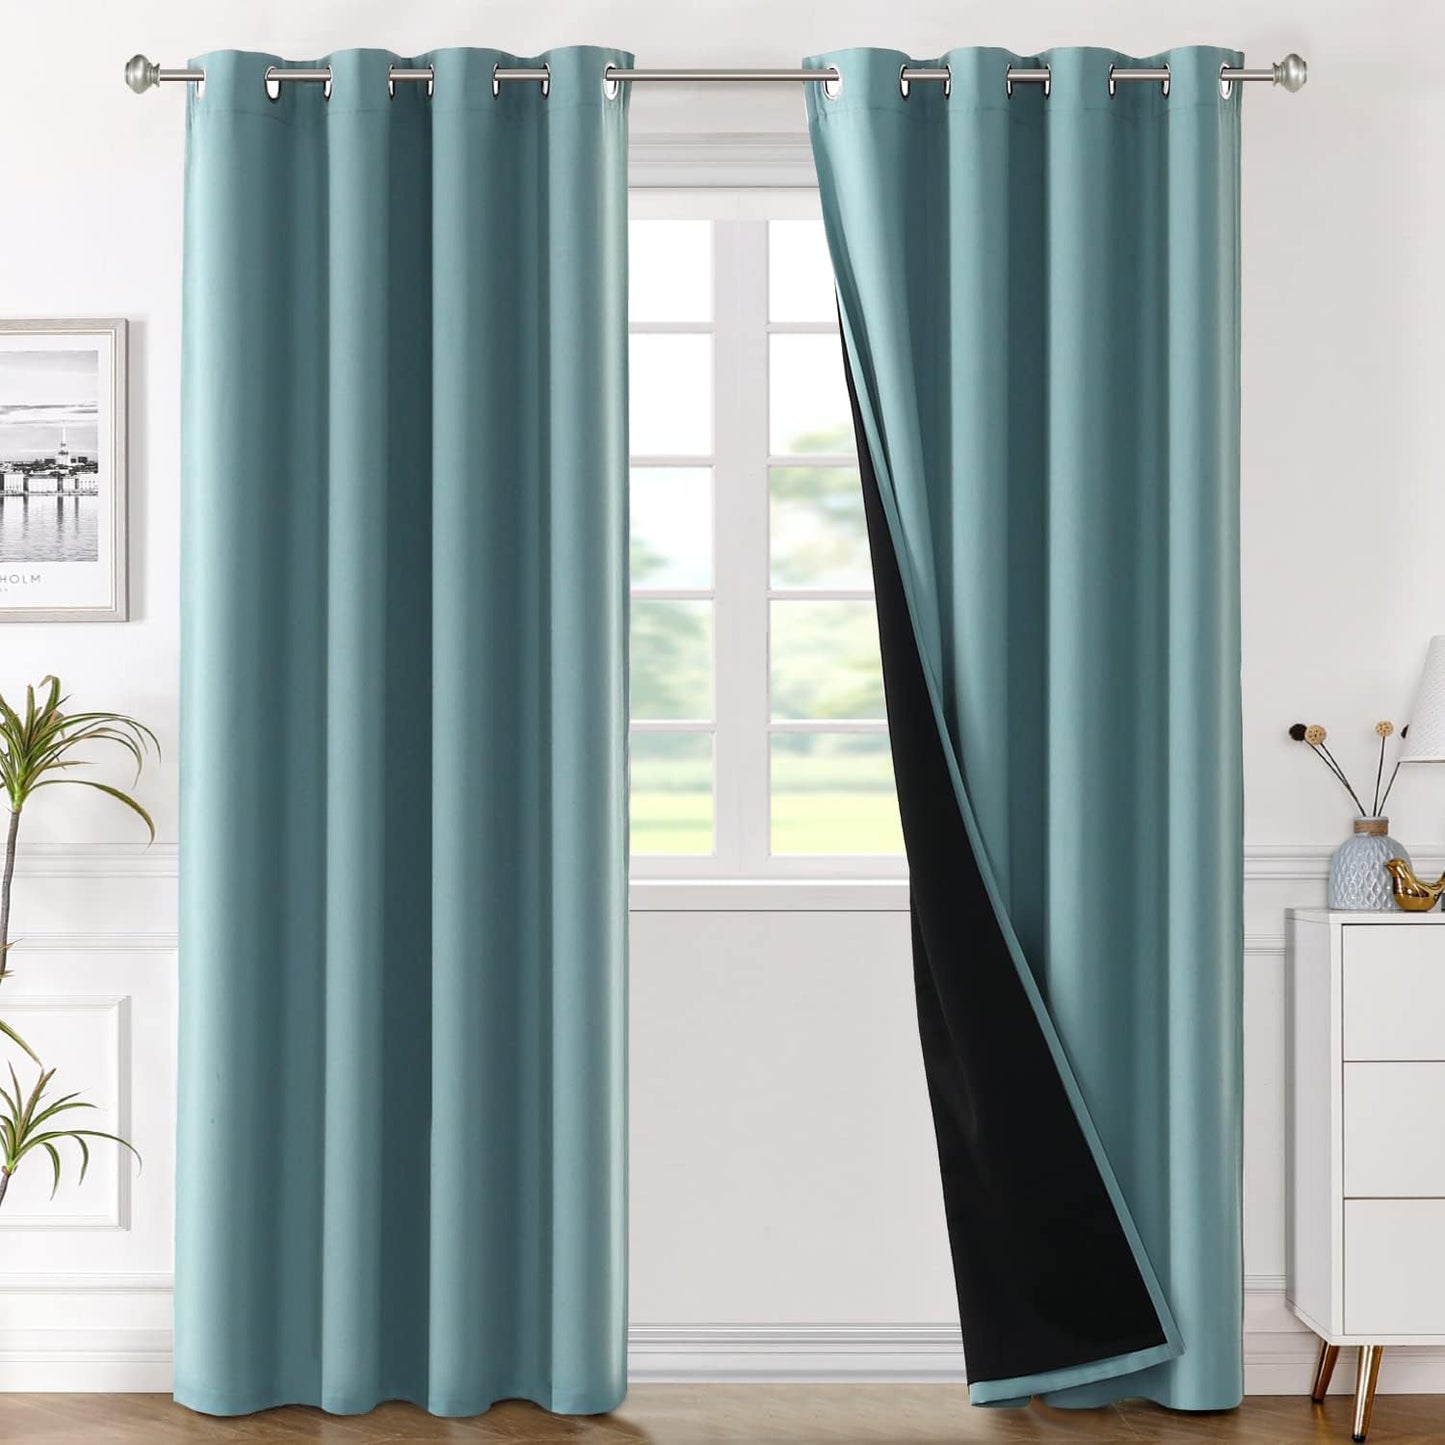 H.VERSAILTEX Blackout Curtains with Liner Backing, Thermal Insulated Curtains for Living Room, Noise Reducing Drapes, White, 52 Inches Wide X 96 Inches Long per Panel, Set of 2 Panels  H.VERSAILTEX Gray Mist 52"W X 84"L 